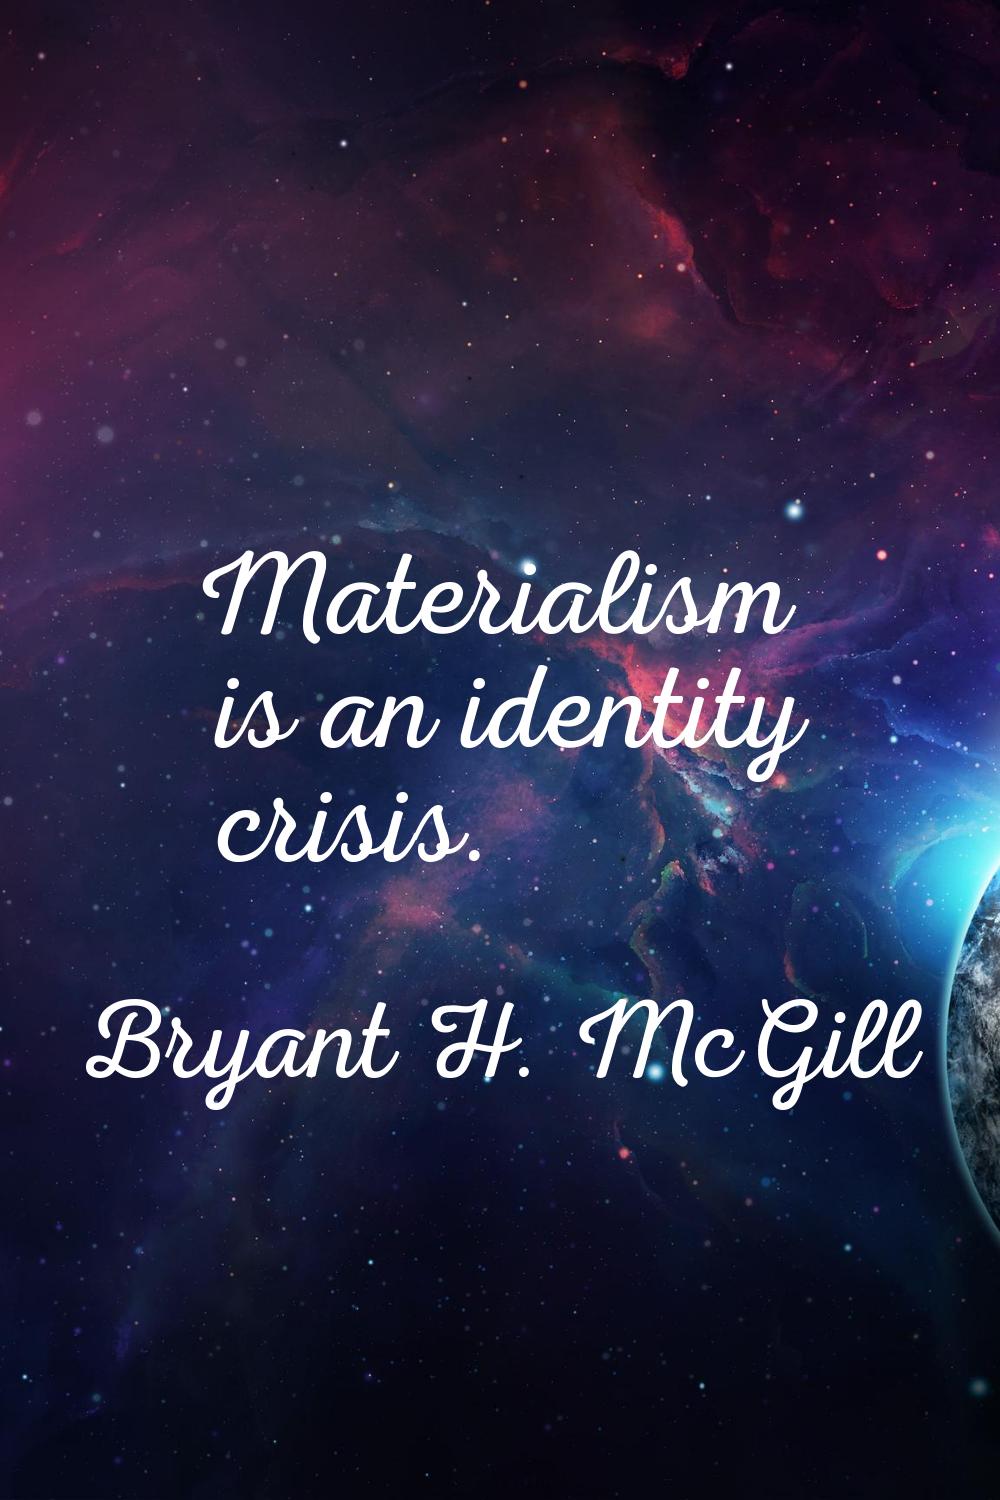 Materialism is an identity crisis.